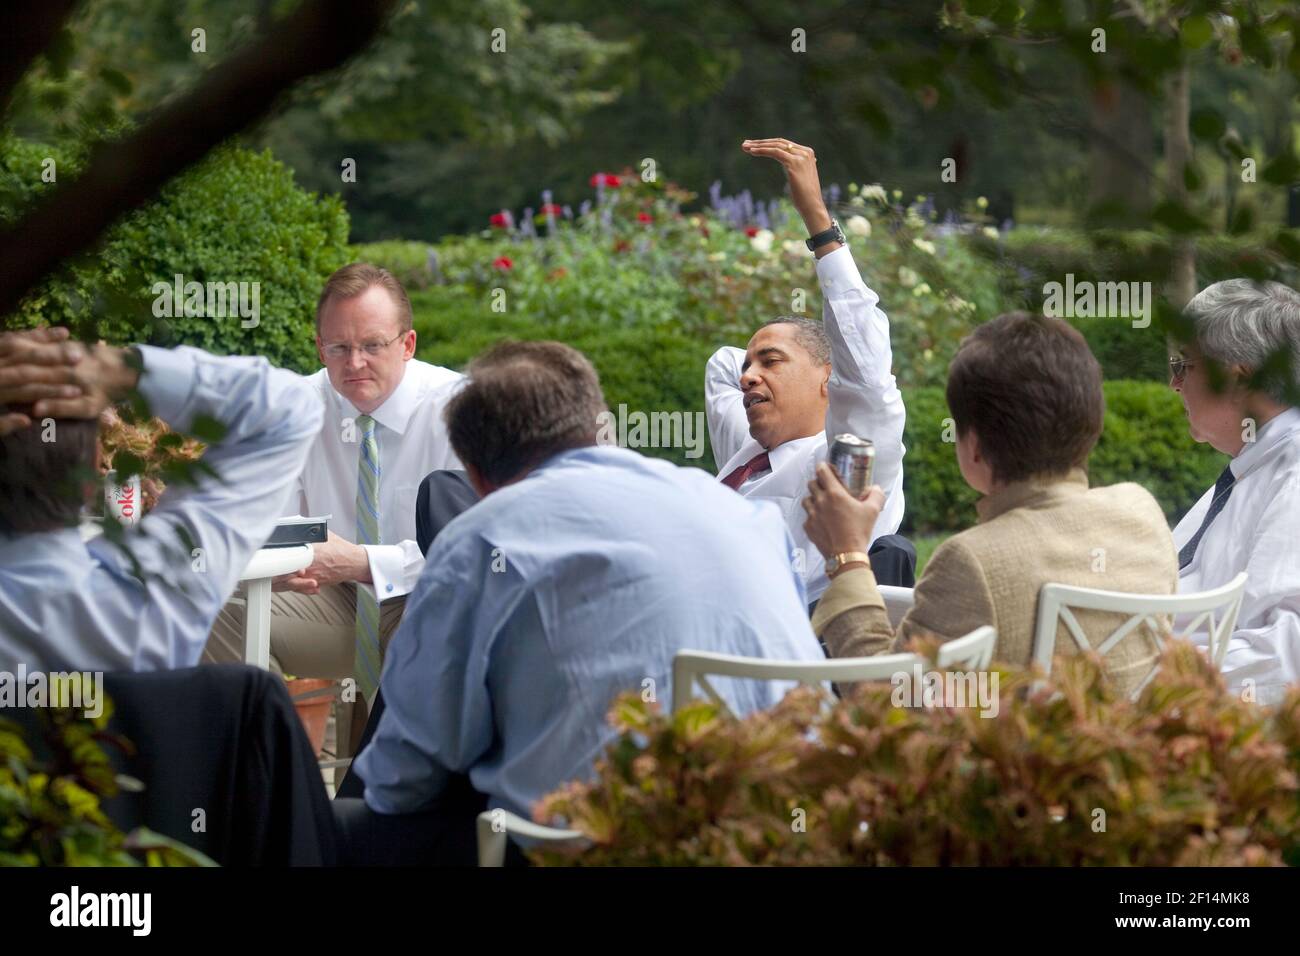 President Barack Obama and his senior advisors meet in the Rose Garden, taking advantage of a pleasant summer day in Washington,  August 12, 2009 Stock Photo